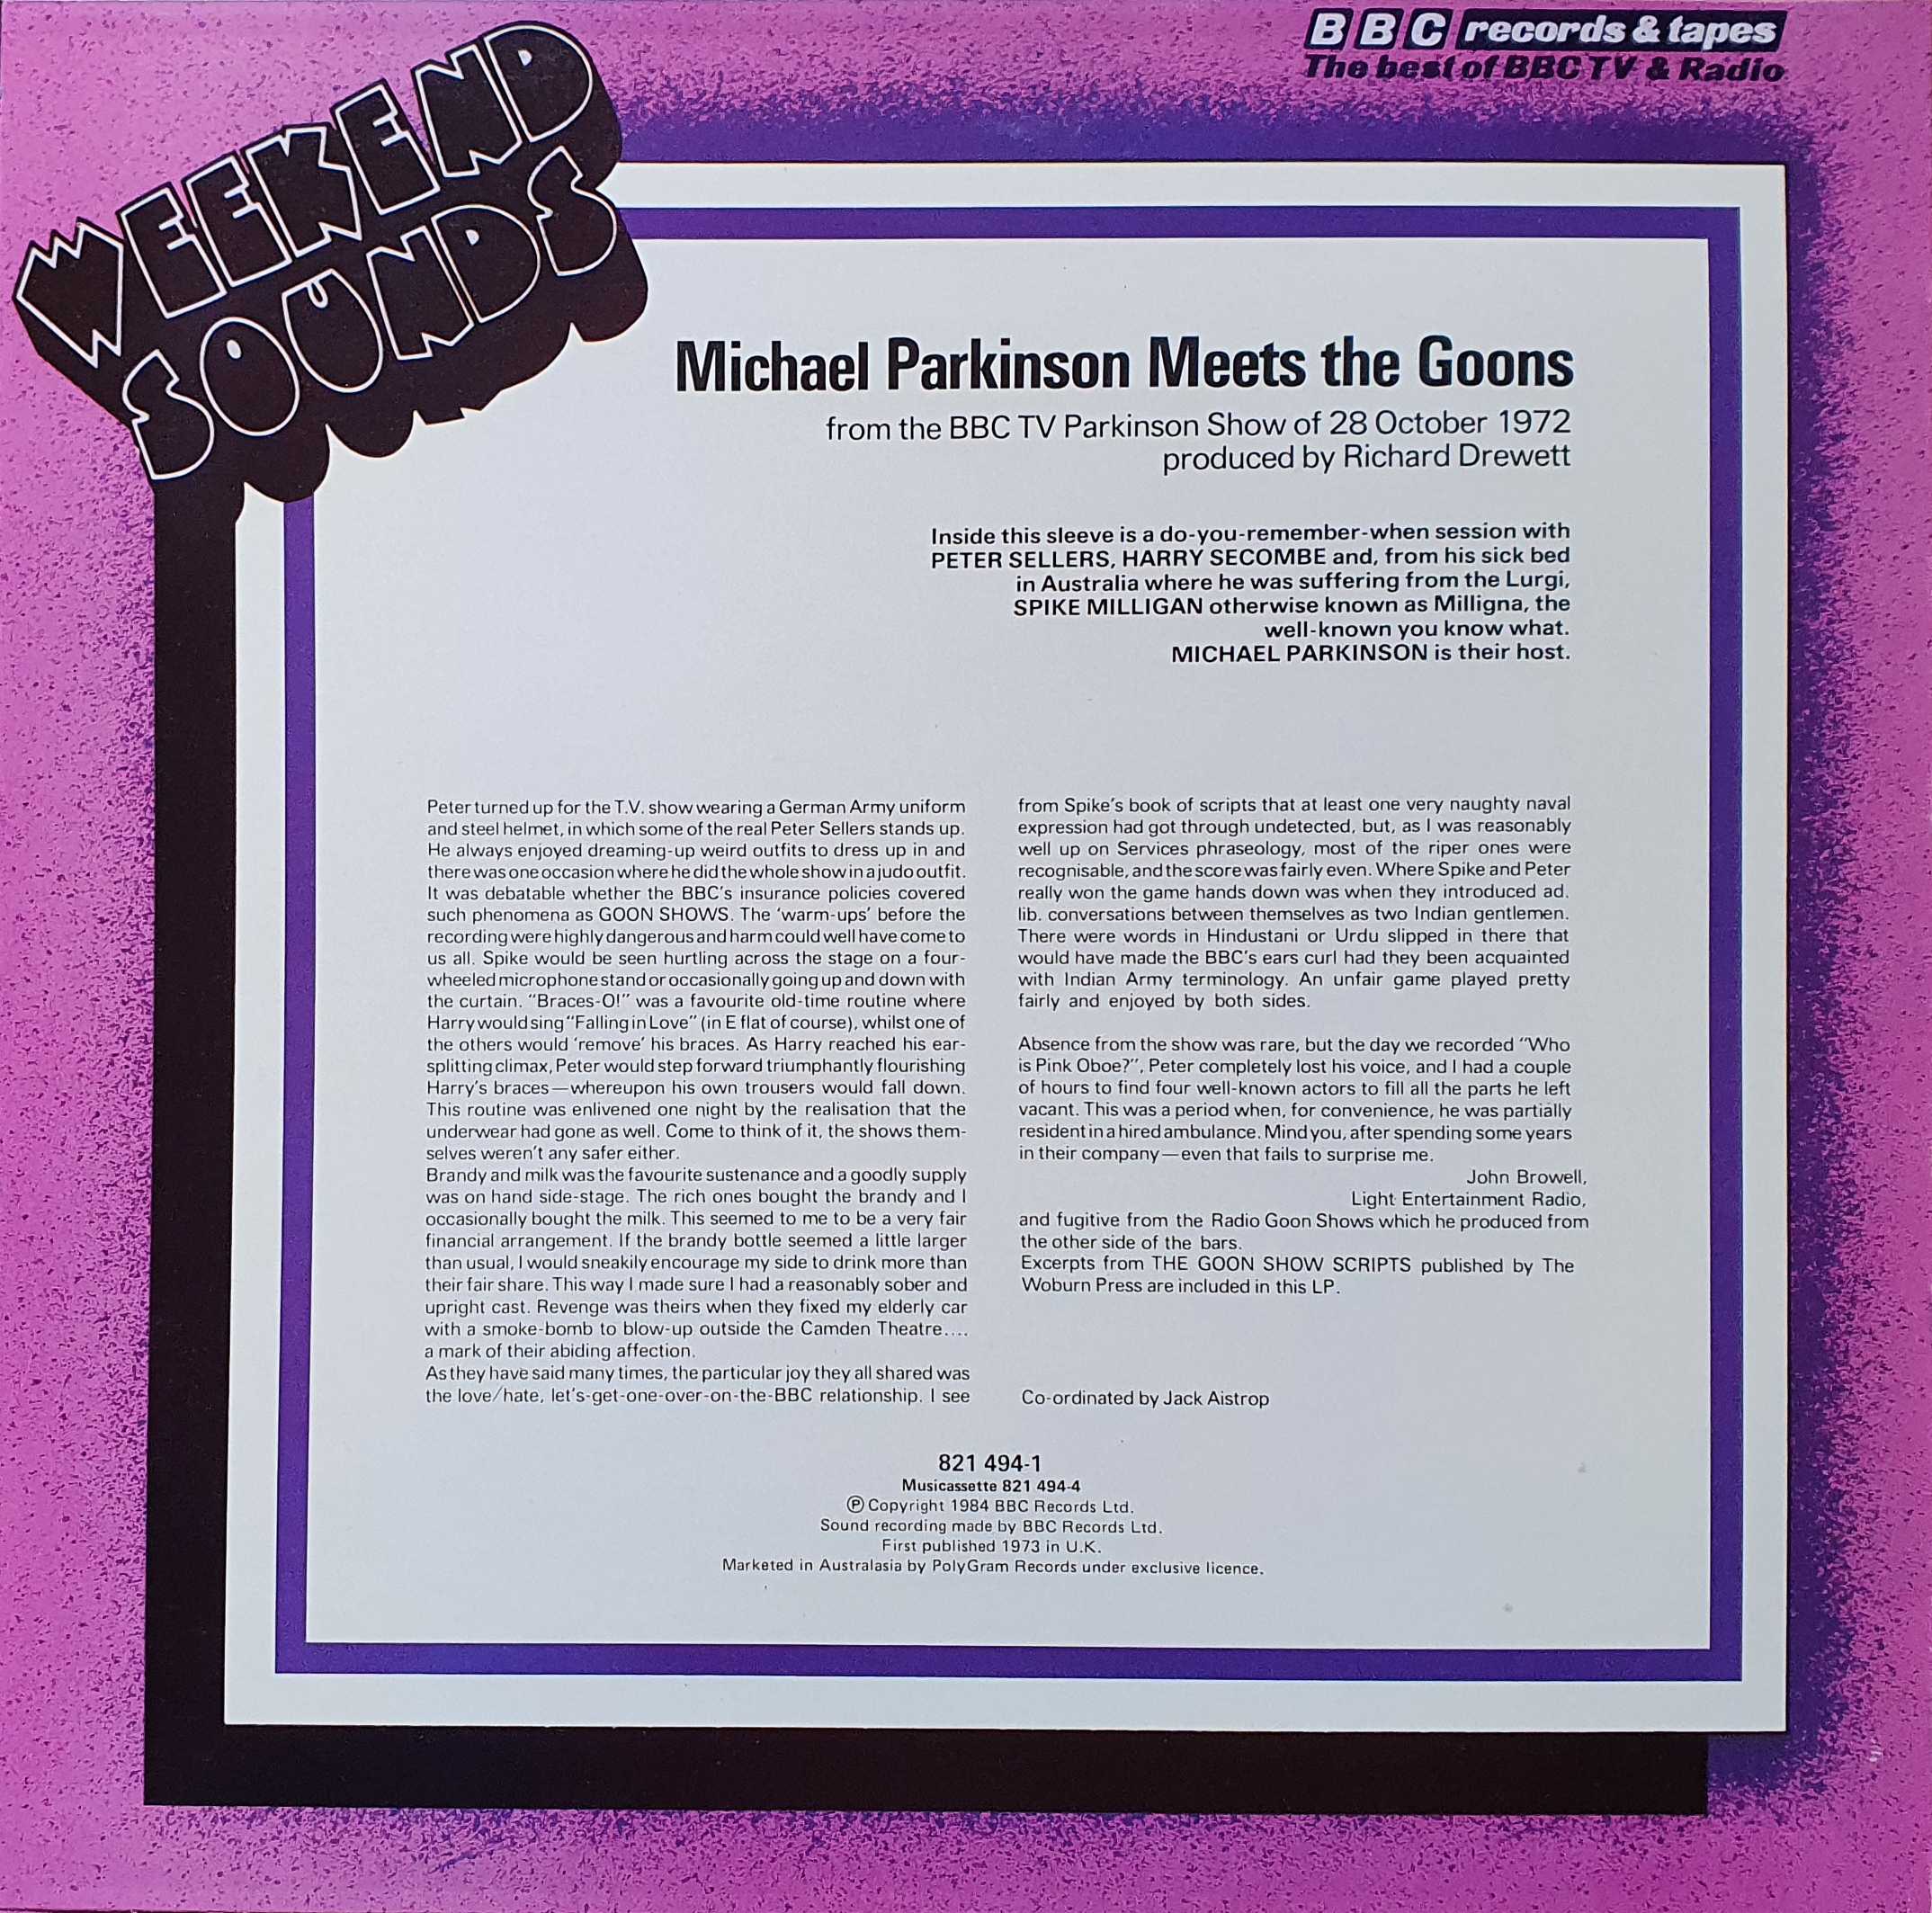 Picture of 821 494-1 Parkinson meets the Goons by artist Michael Parkinson from the BBC records and Tapes library